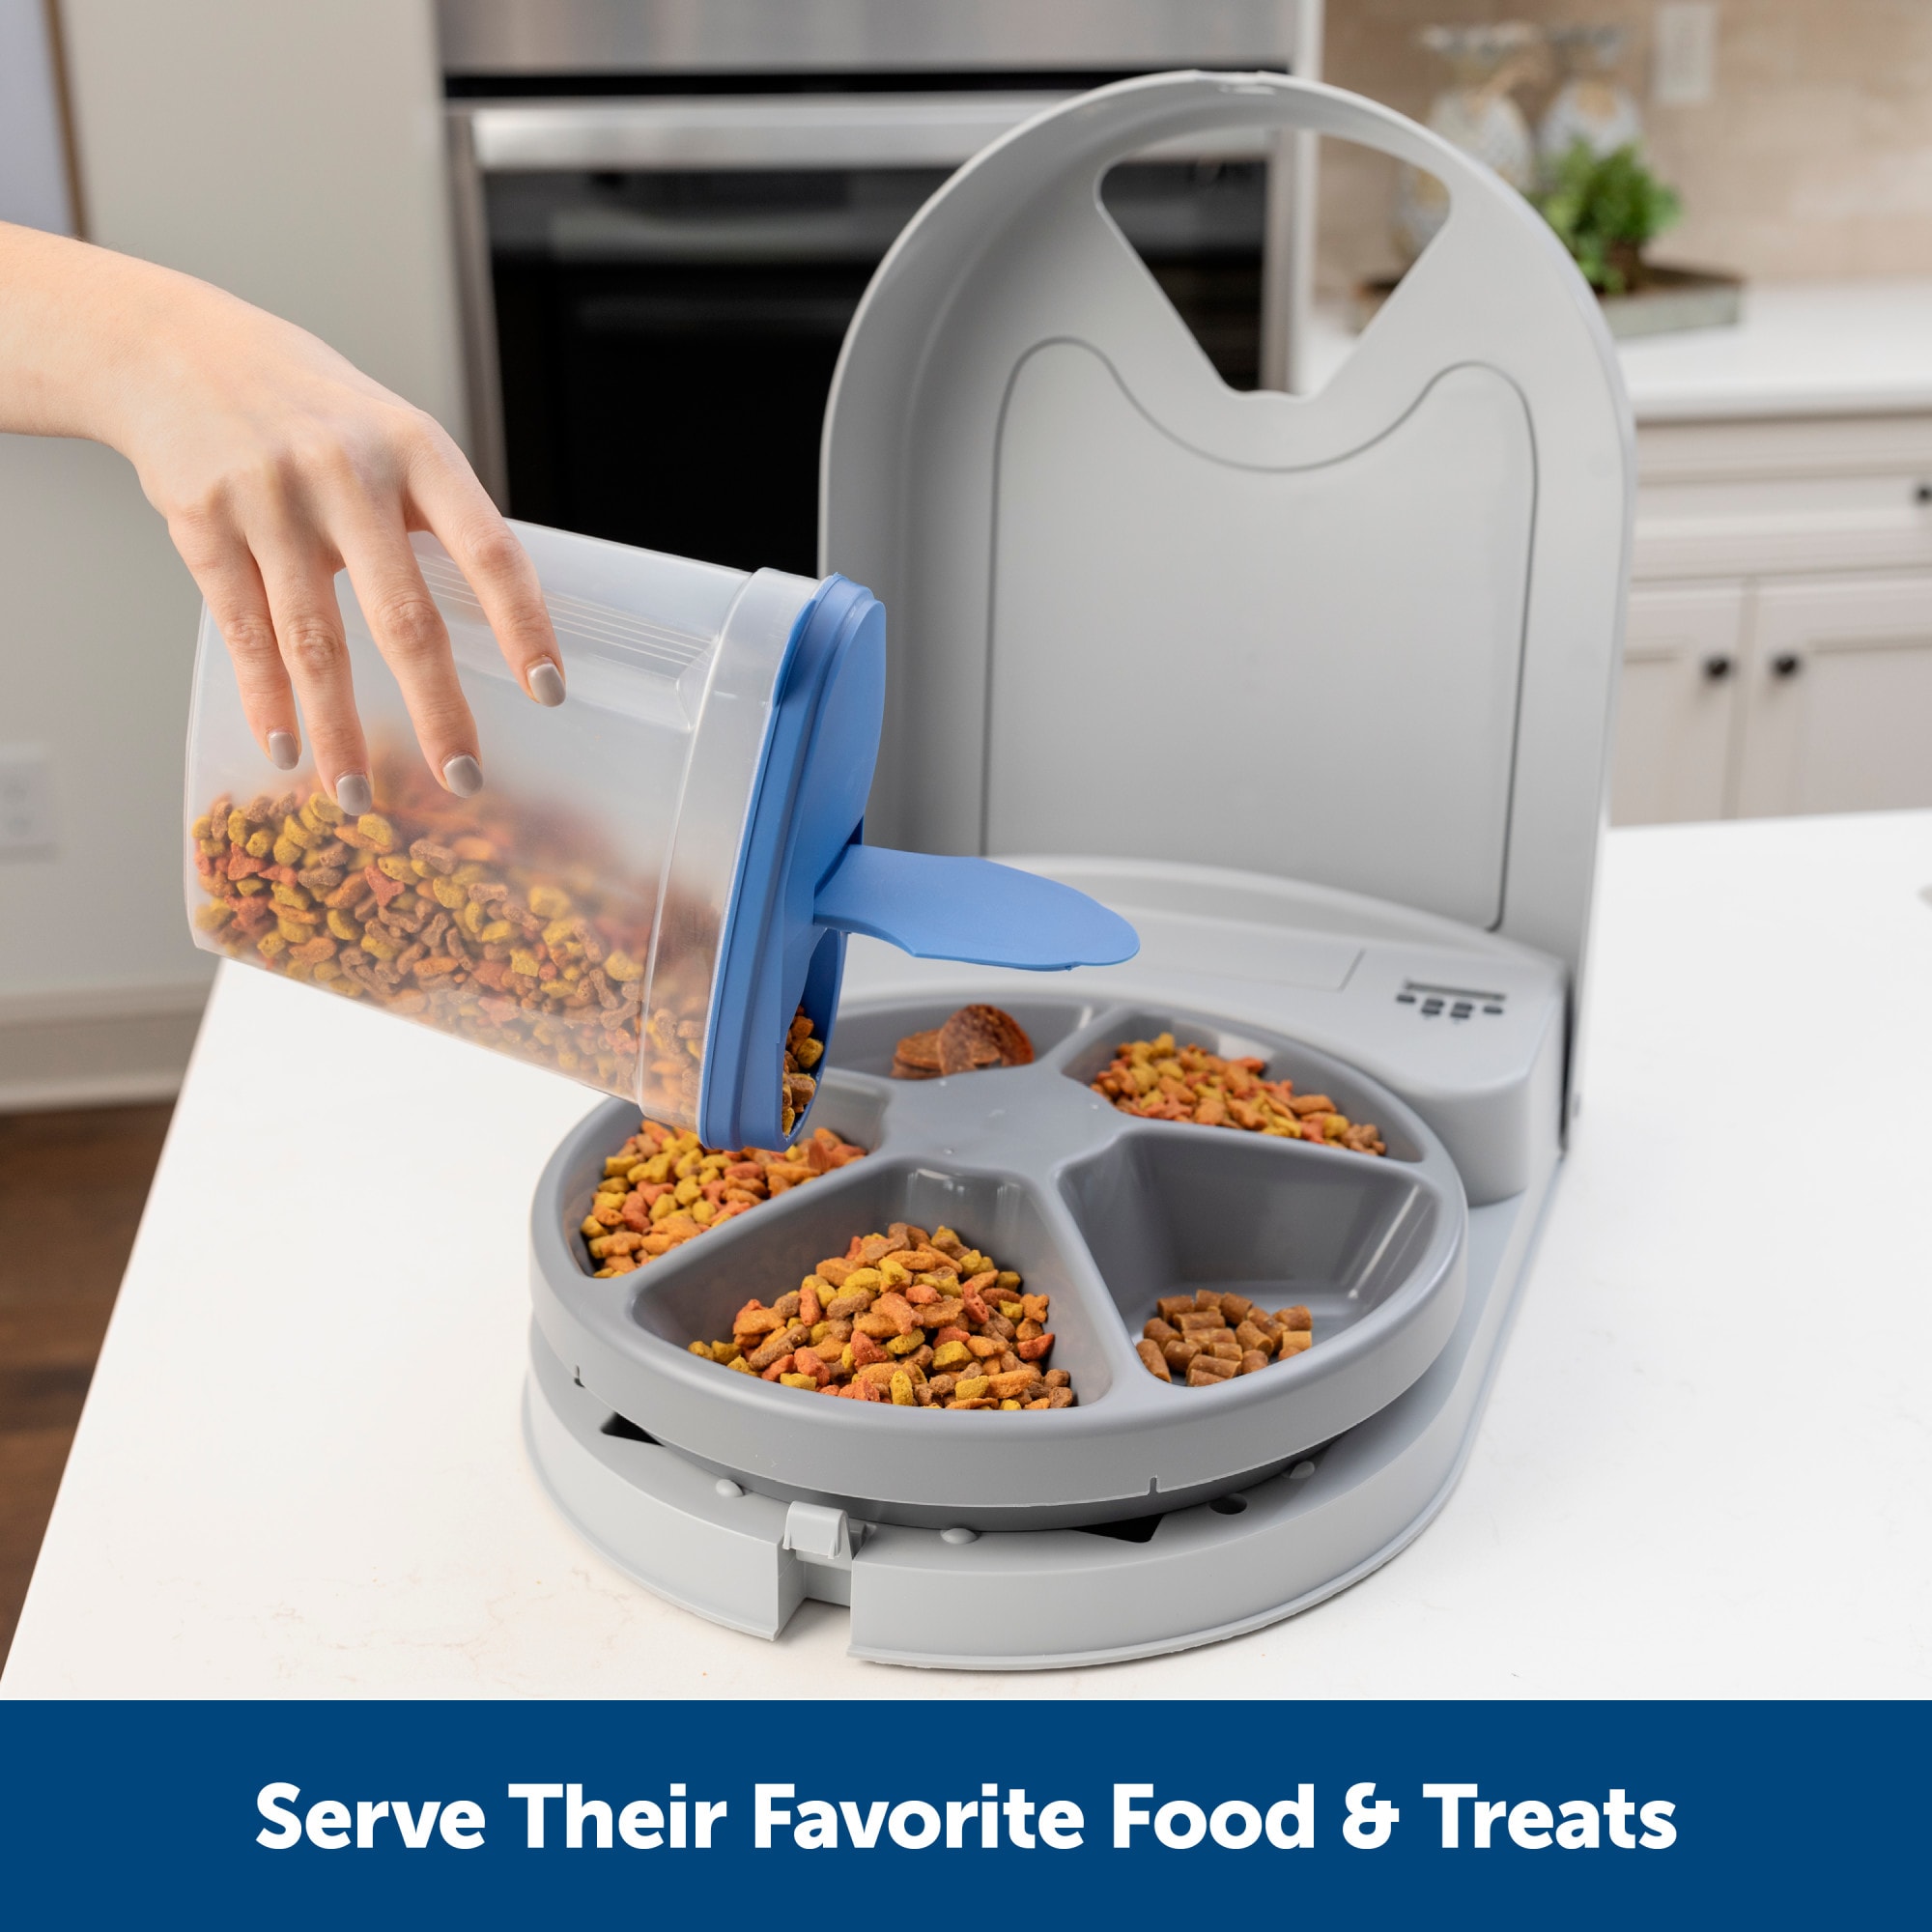 PetSafe 5 Meal Pet Feeder review: Low-tech, but affordable option